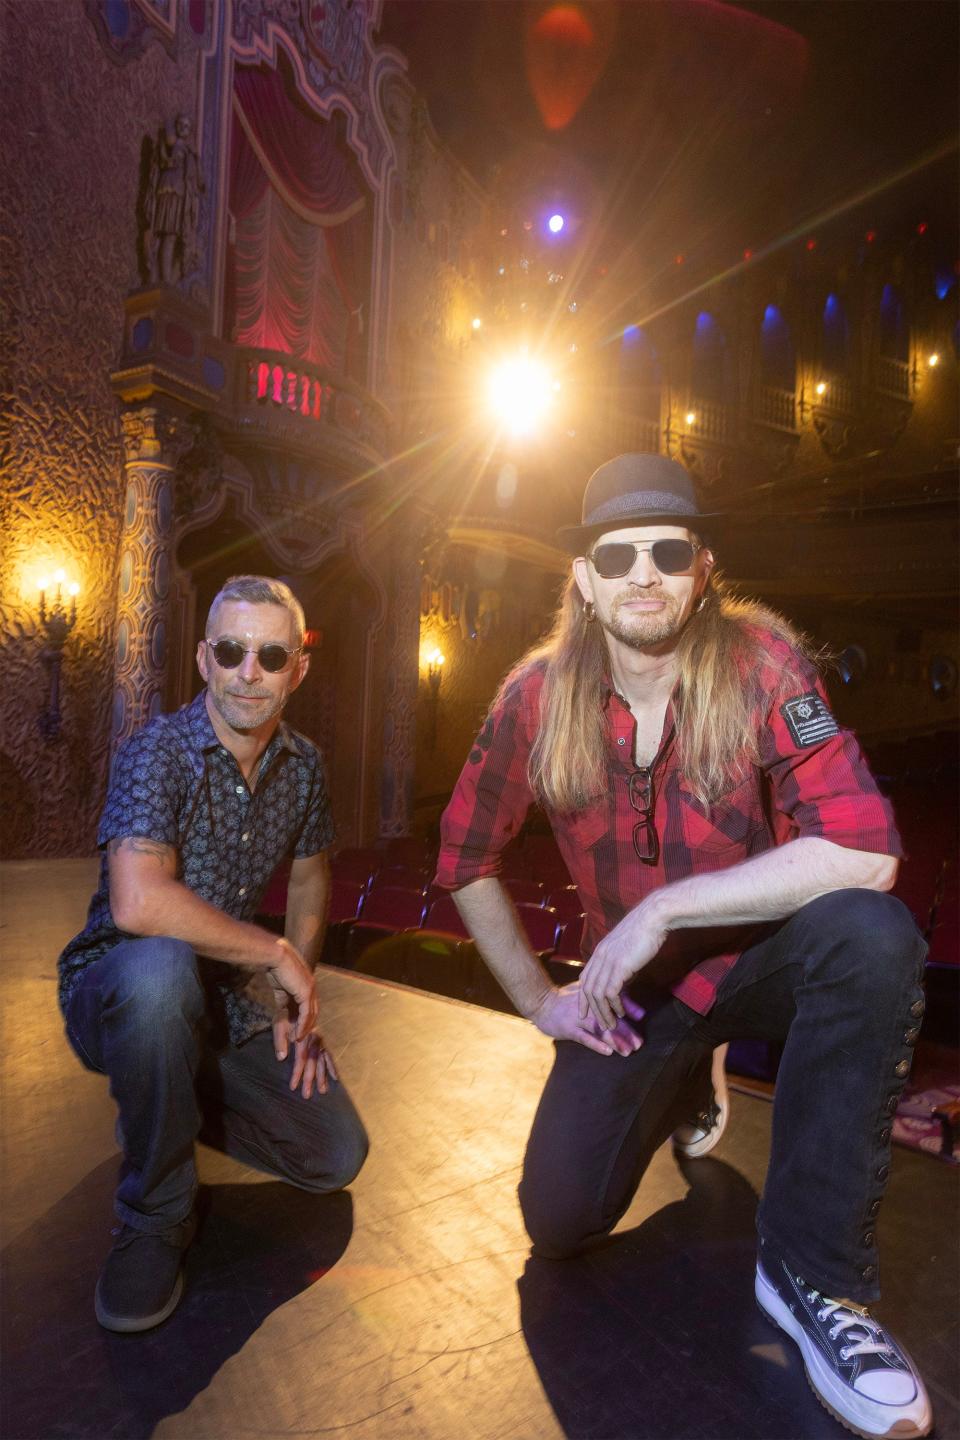 Jay Secrest, left, and Ken Harding of New Wave Nation are shown inside the Canton Palace Theatre, where they will have a 25th anniversary concert at 7:30 p.m. today. Tickets are $25. The band performs the music of Prince, Duran Duran, Joan Jett, Def Leppard, the Stray Cats, Men Without Hats, Michael Jackson and others.